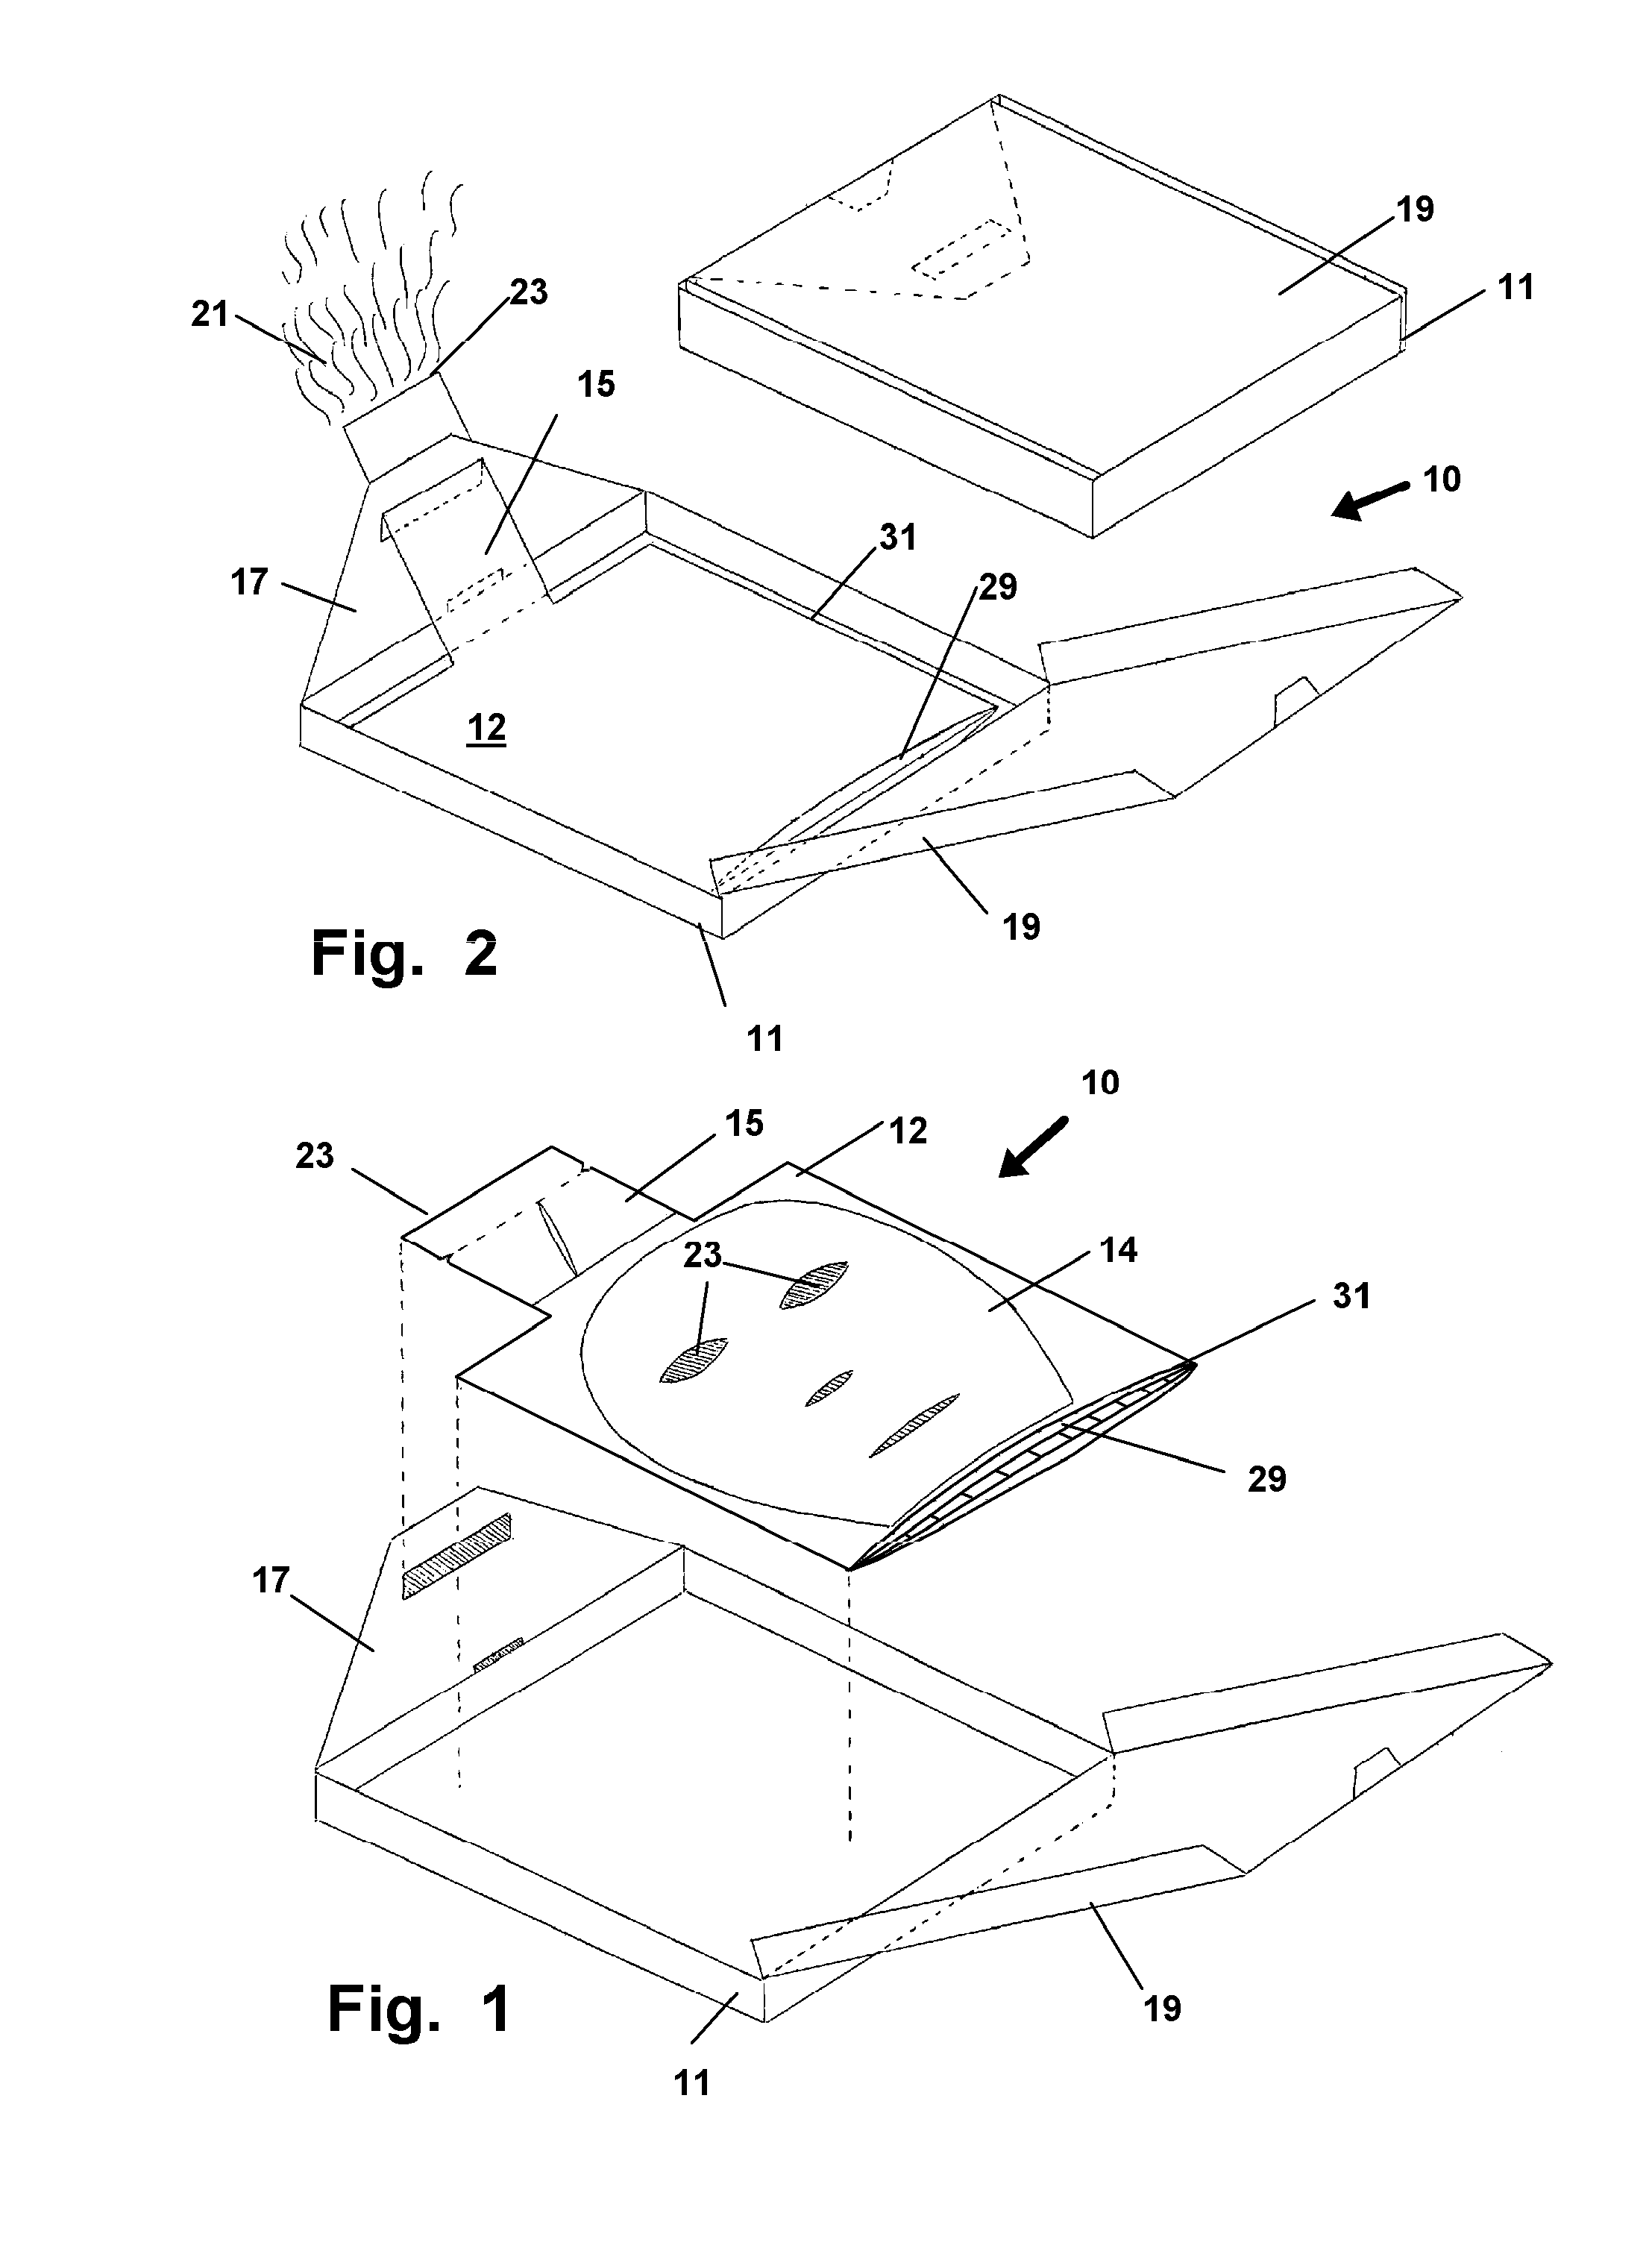 Method and Apparatus of Paraffin Treatment of the Skin